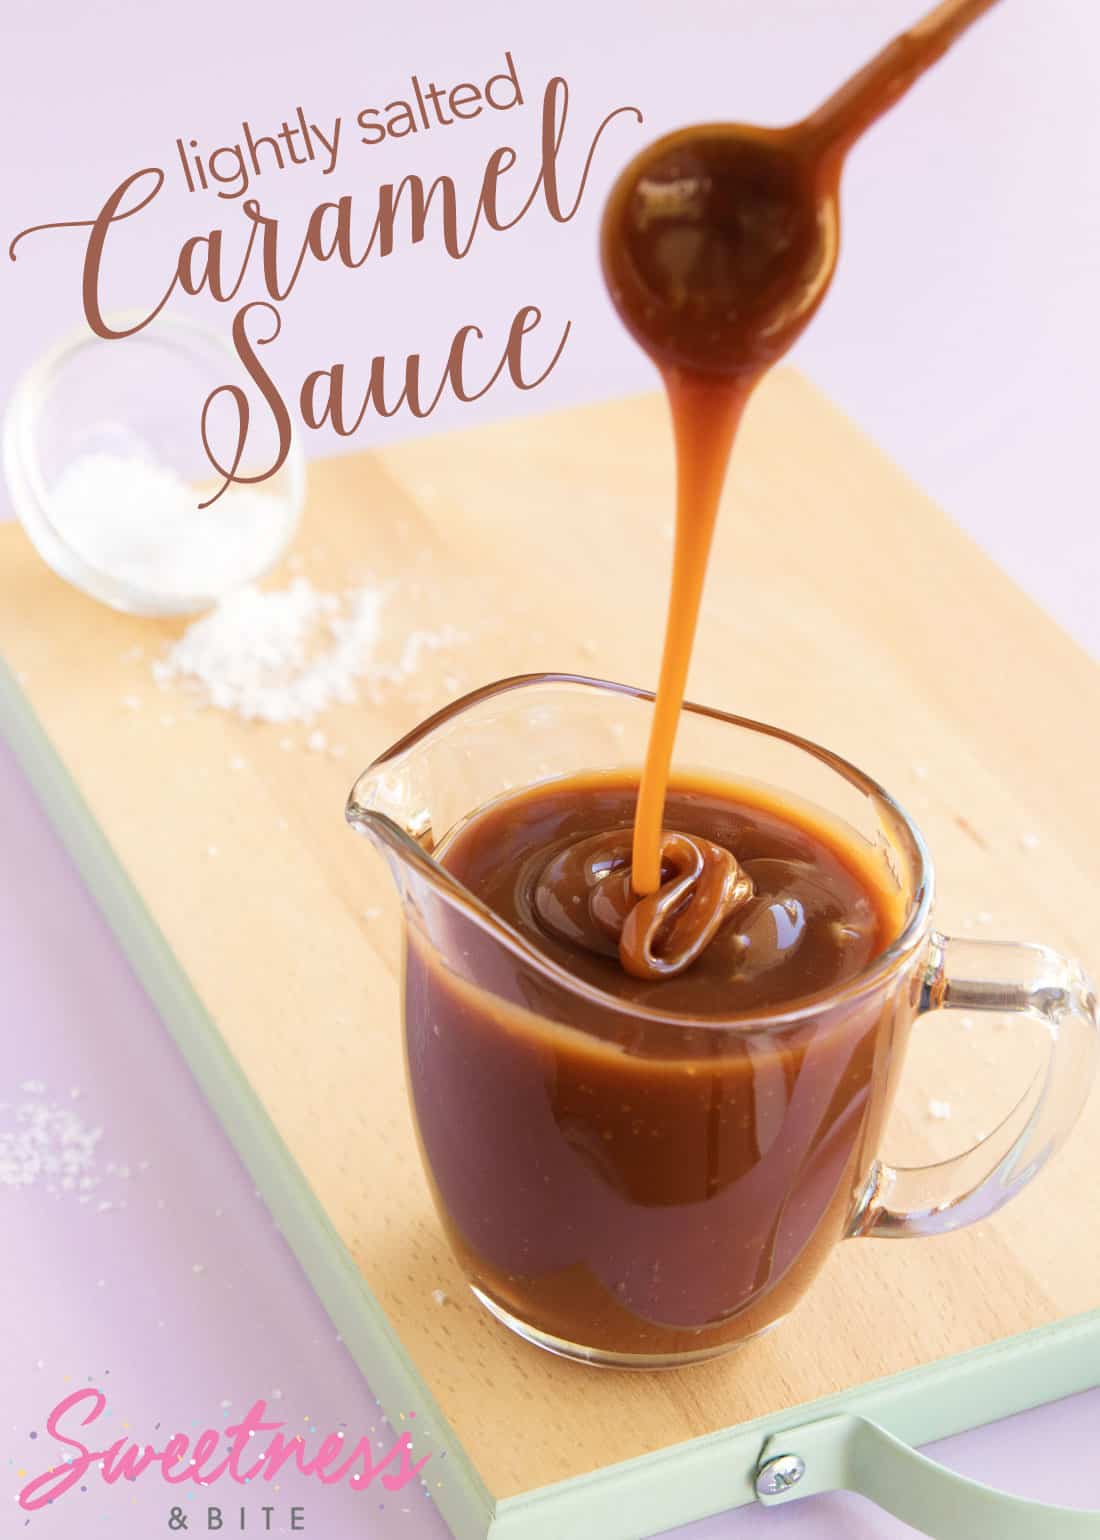 A small round spoon dripping caramel sauce back into a glass jug containing more caramel sauce.